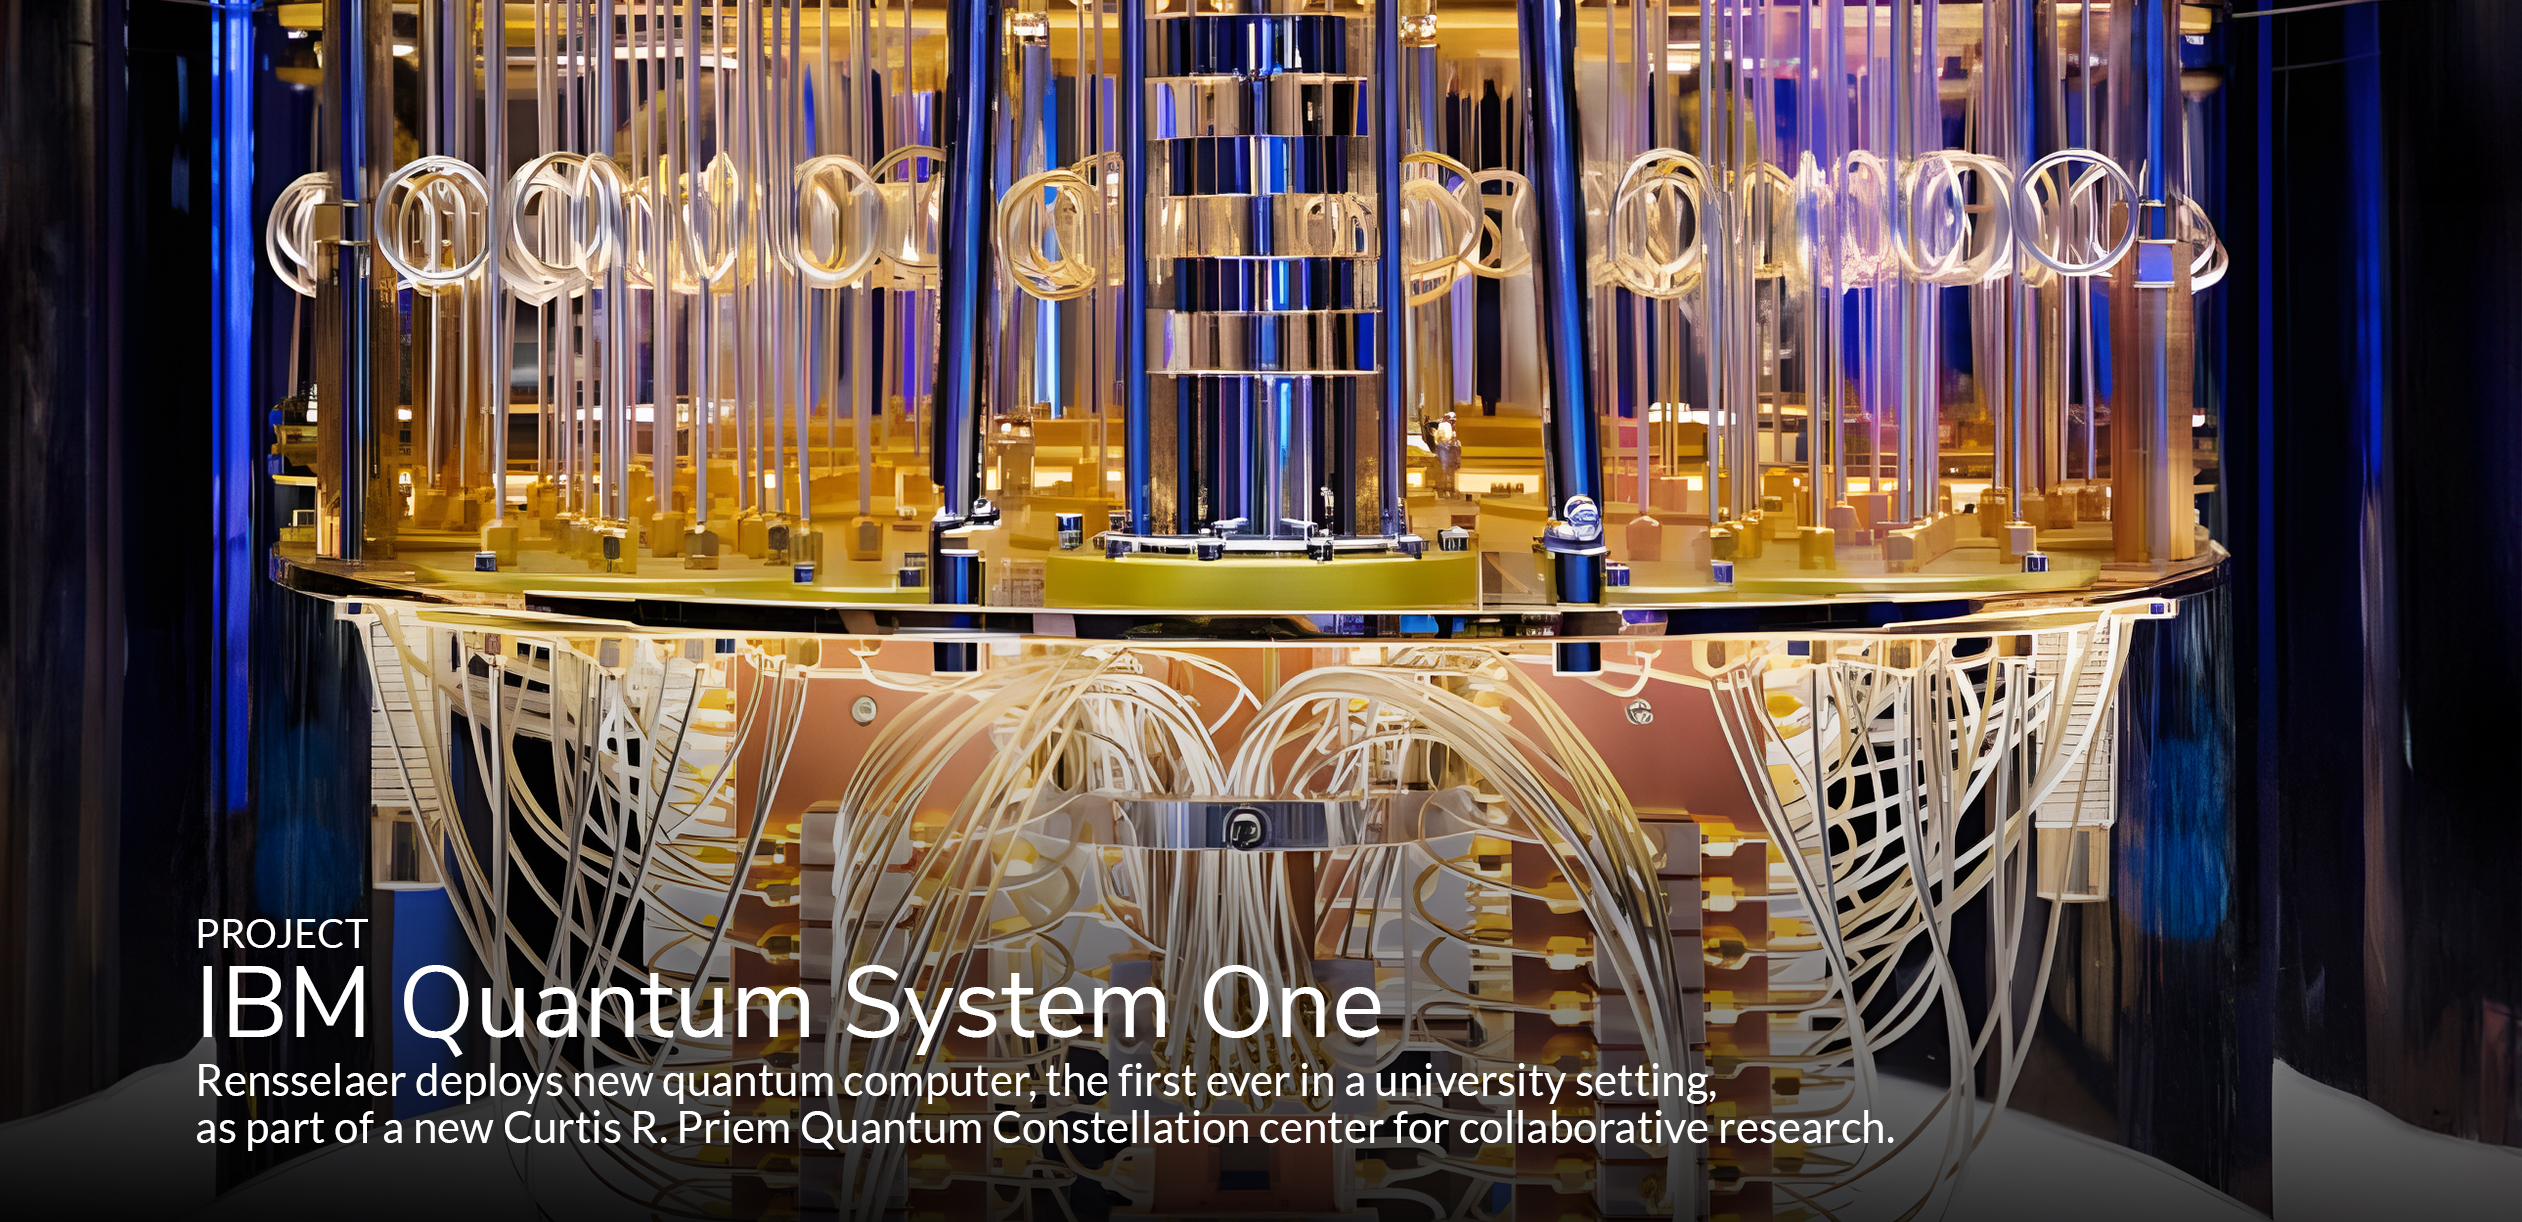 PROJECT IBM Quantum System One Rensselaer deploys new quantum computer, the first ever in a university setting, as part of a new Curtis R. Priem Quantum Constellation center for collaborative research.